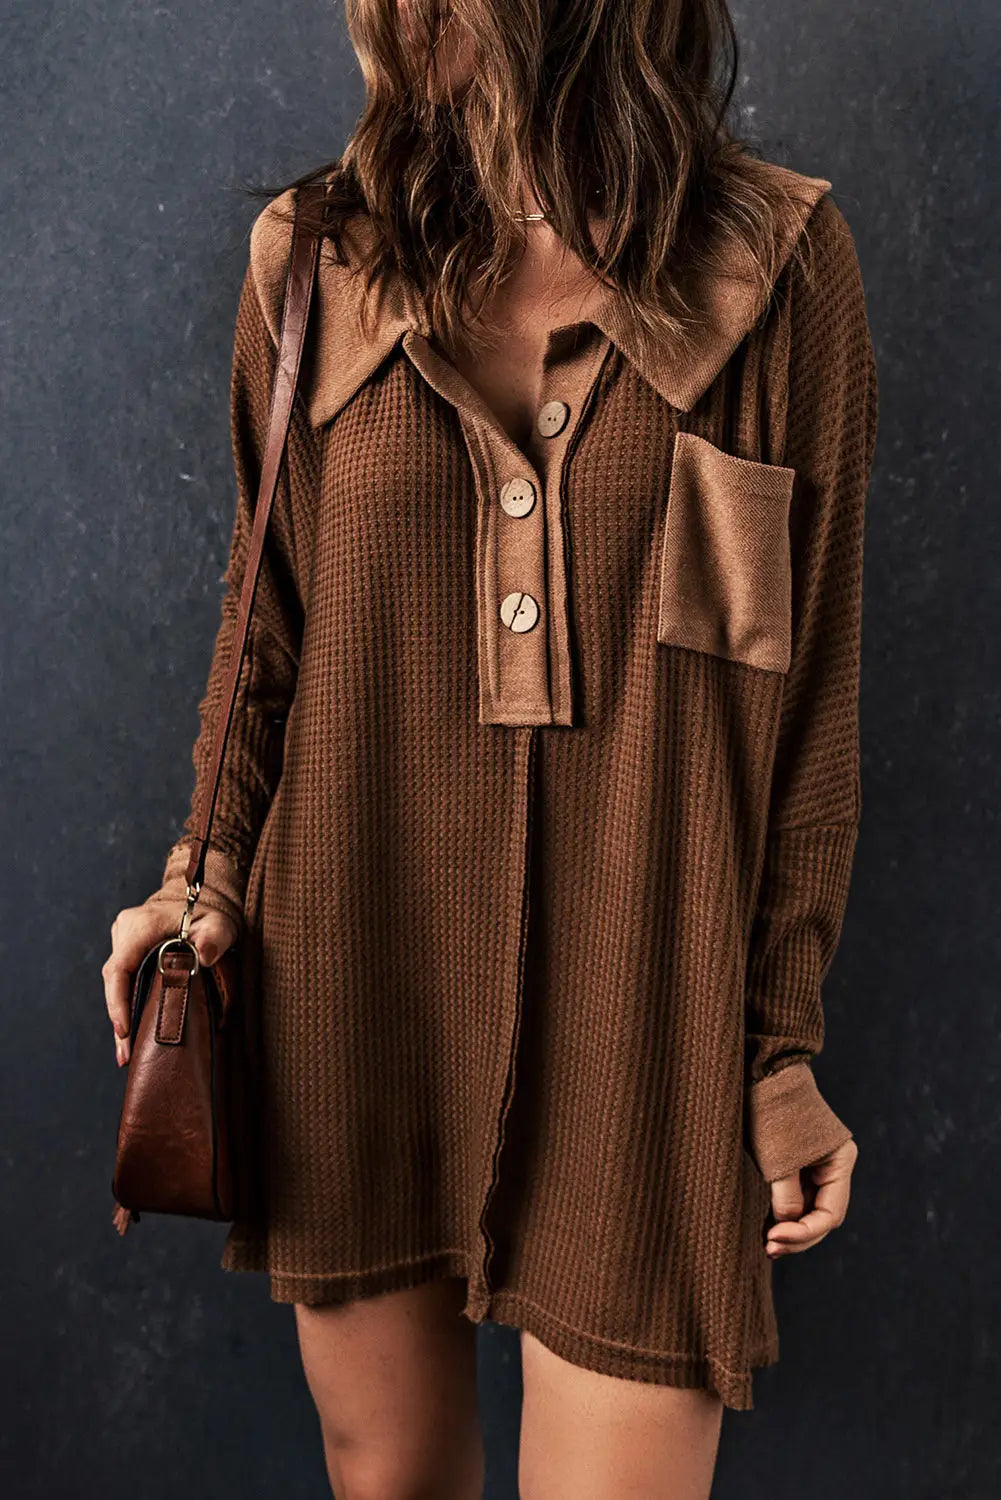 Brown waffle knit buttoned long sleeve top - tops